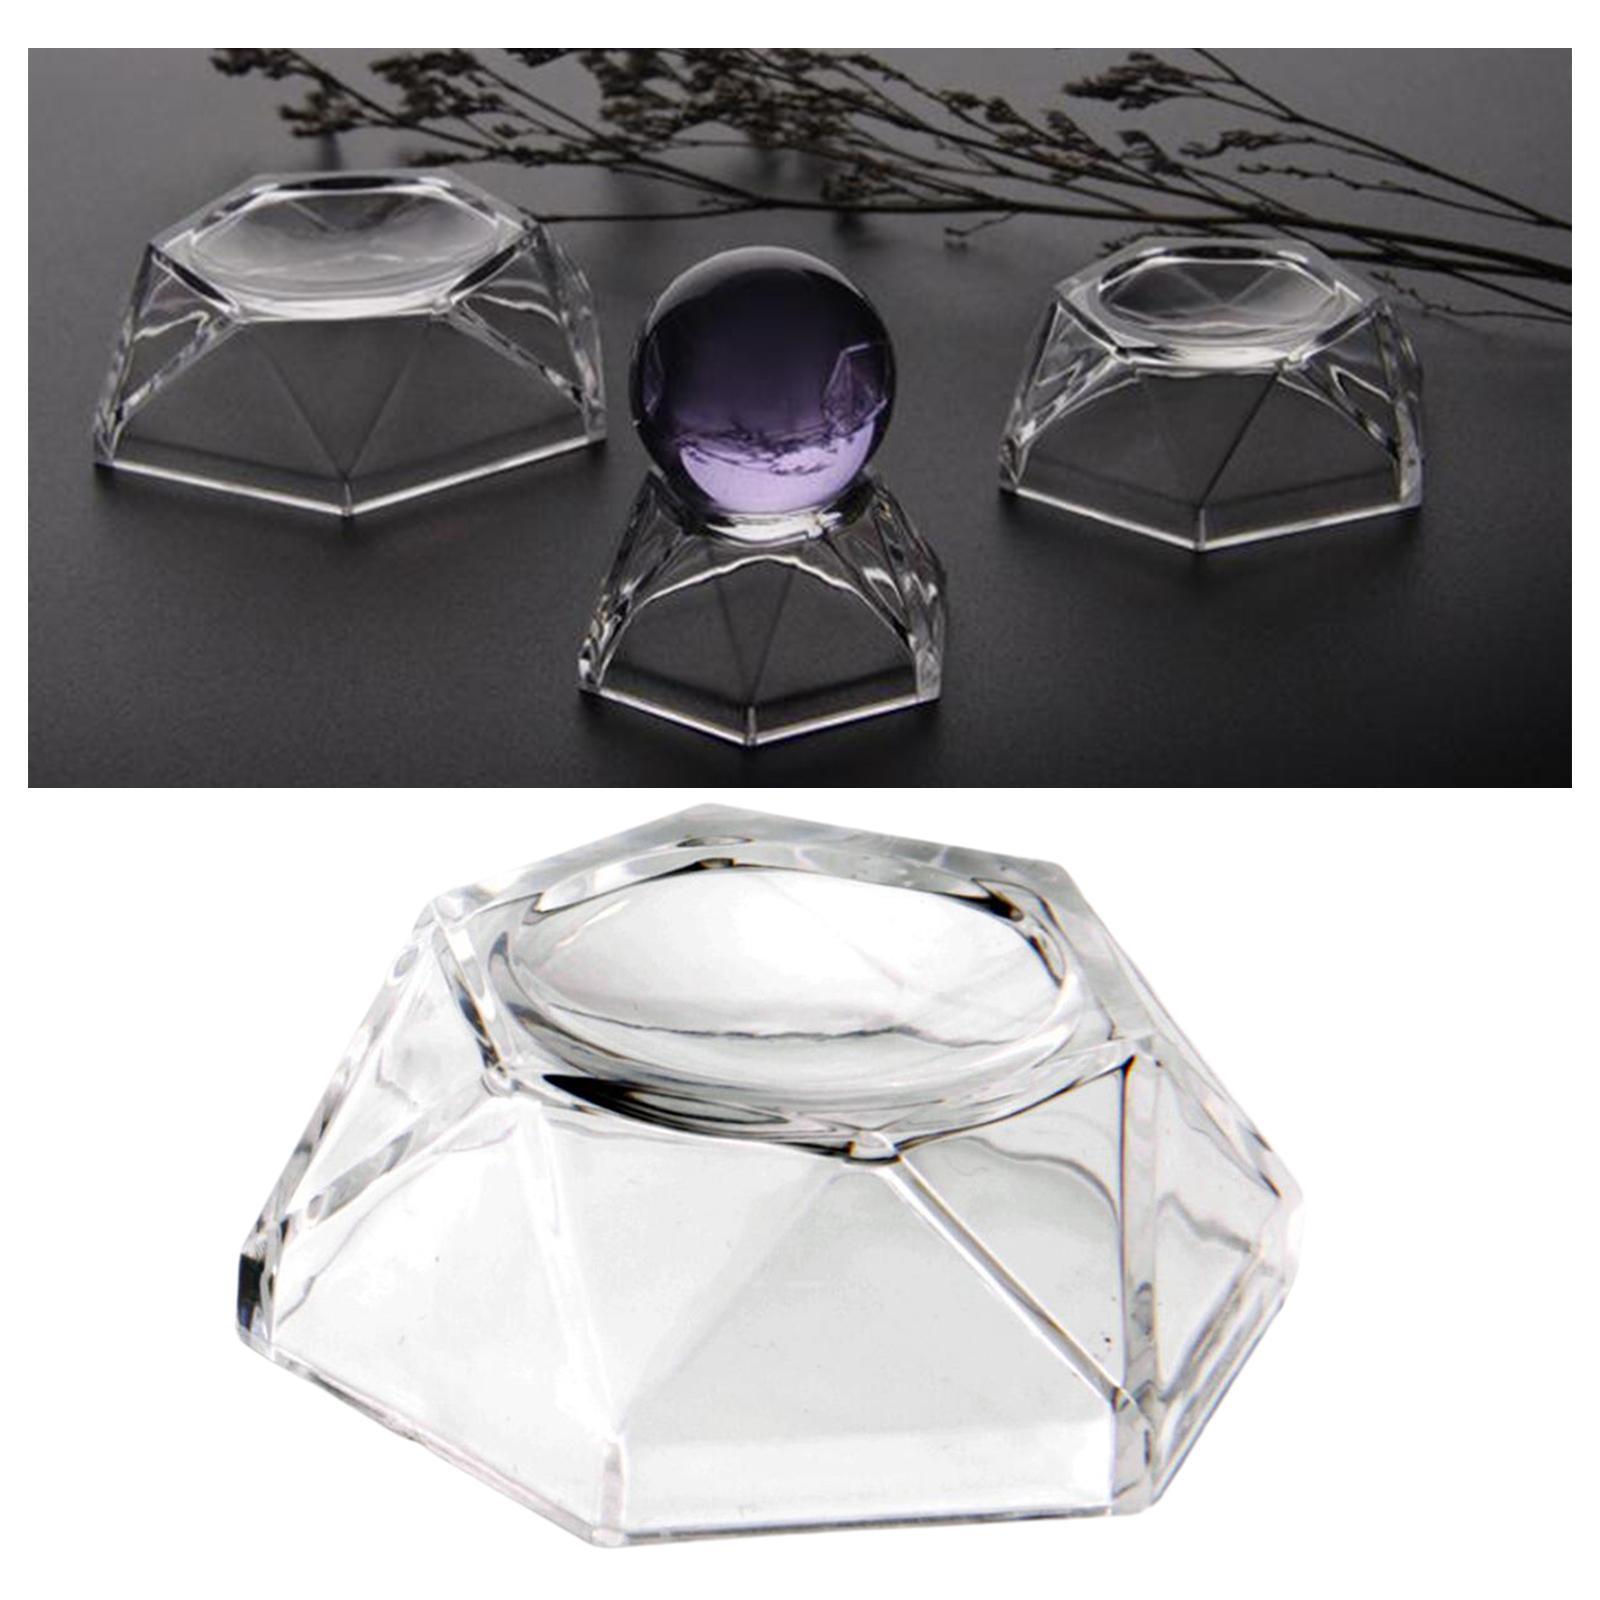 2x Acrylic Clear Display Stand Holder Base For Crystal Ball Transparent